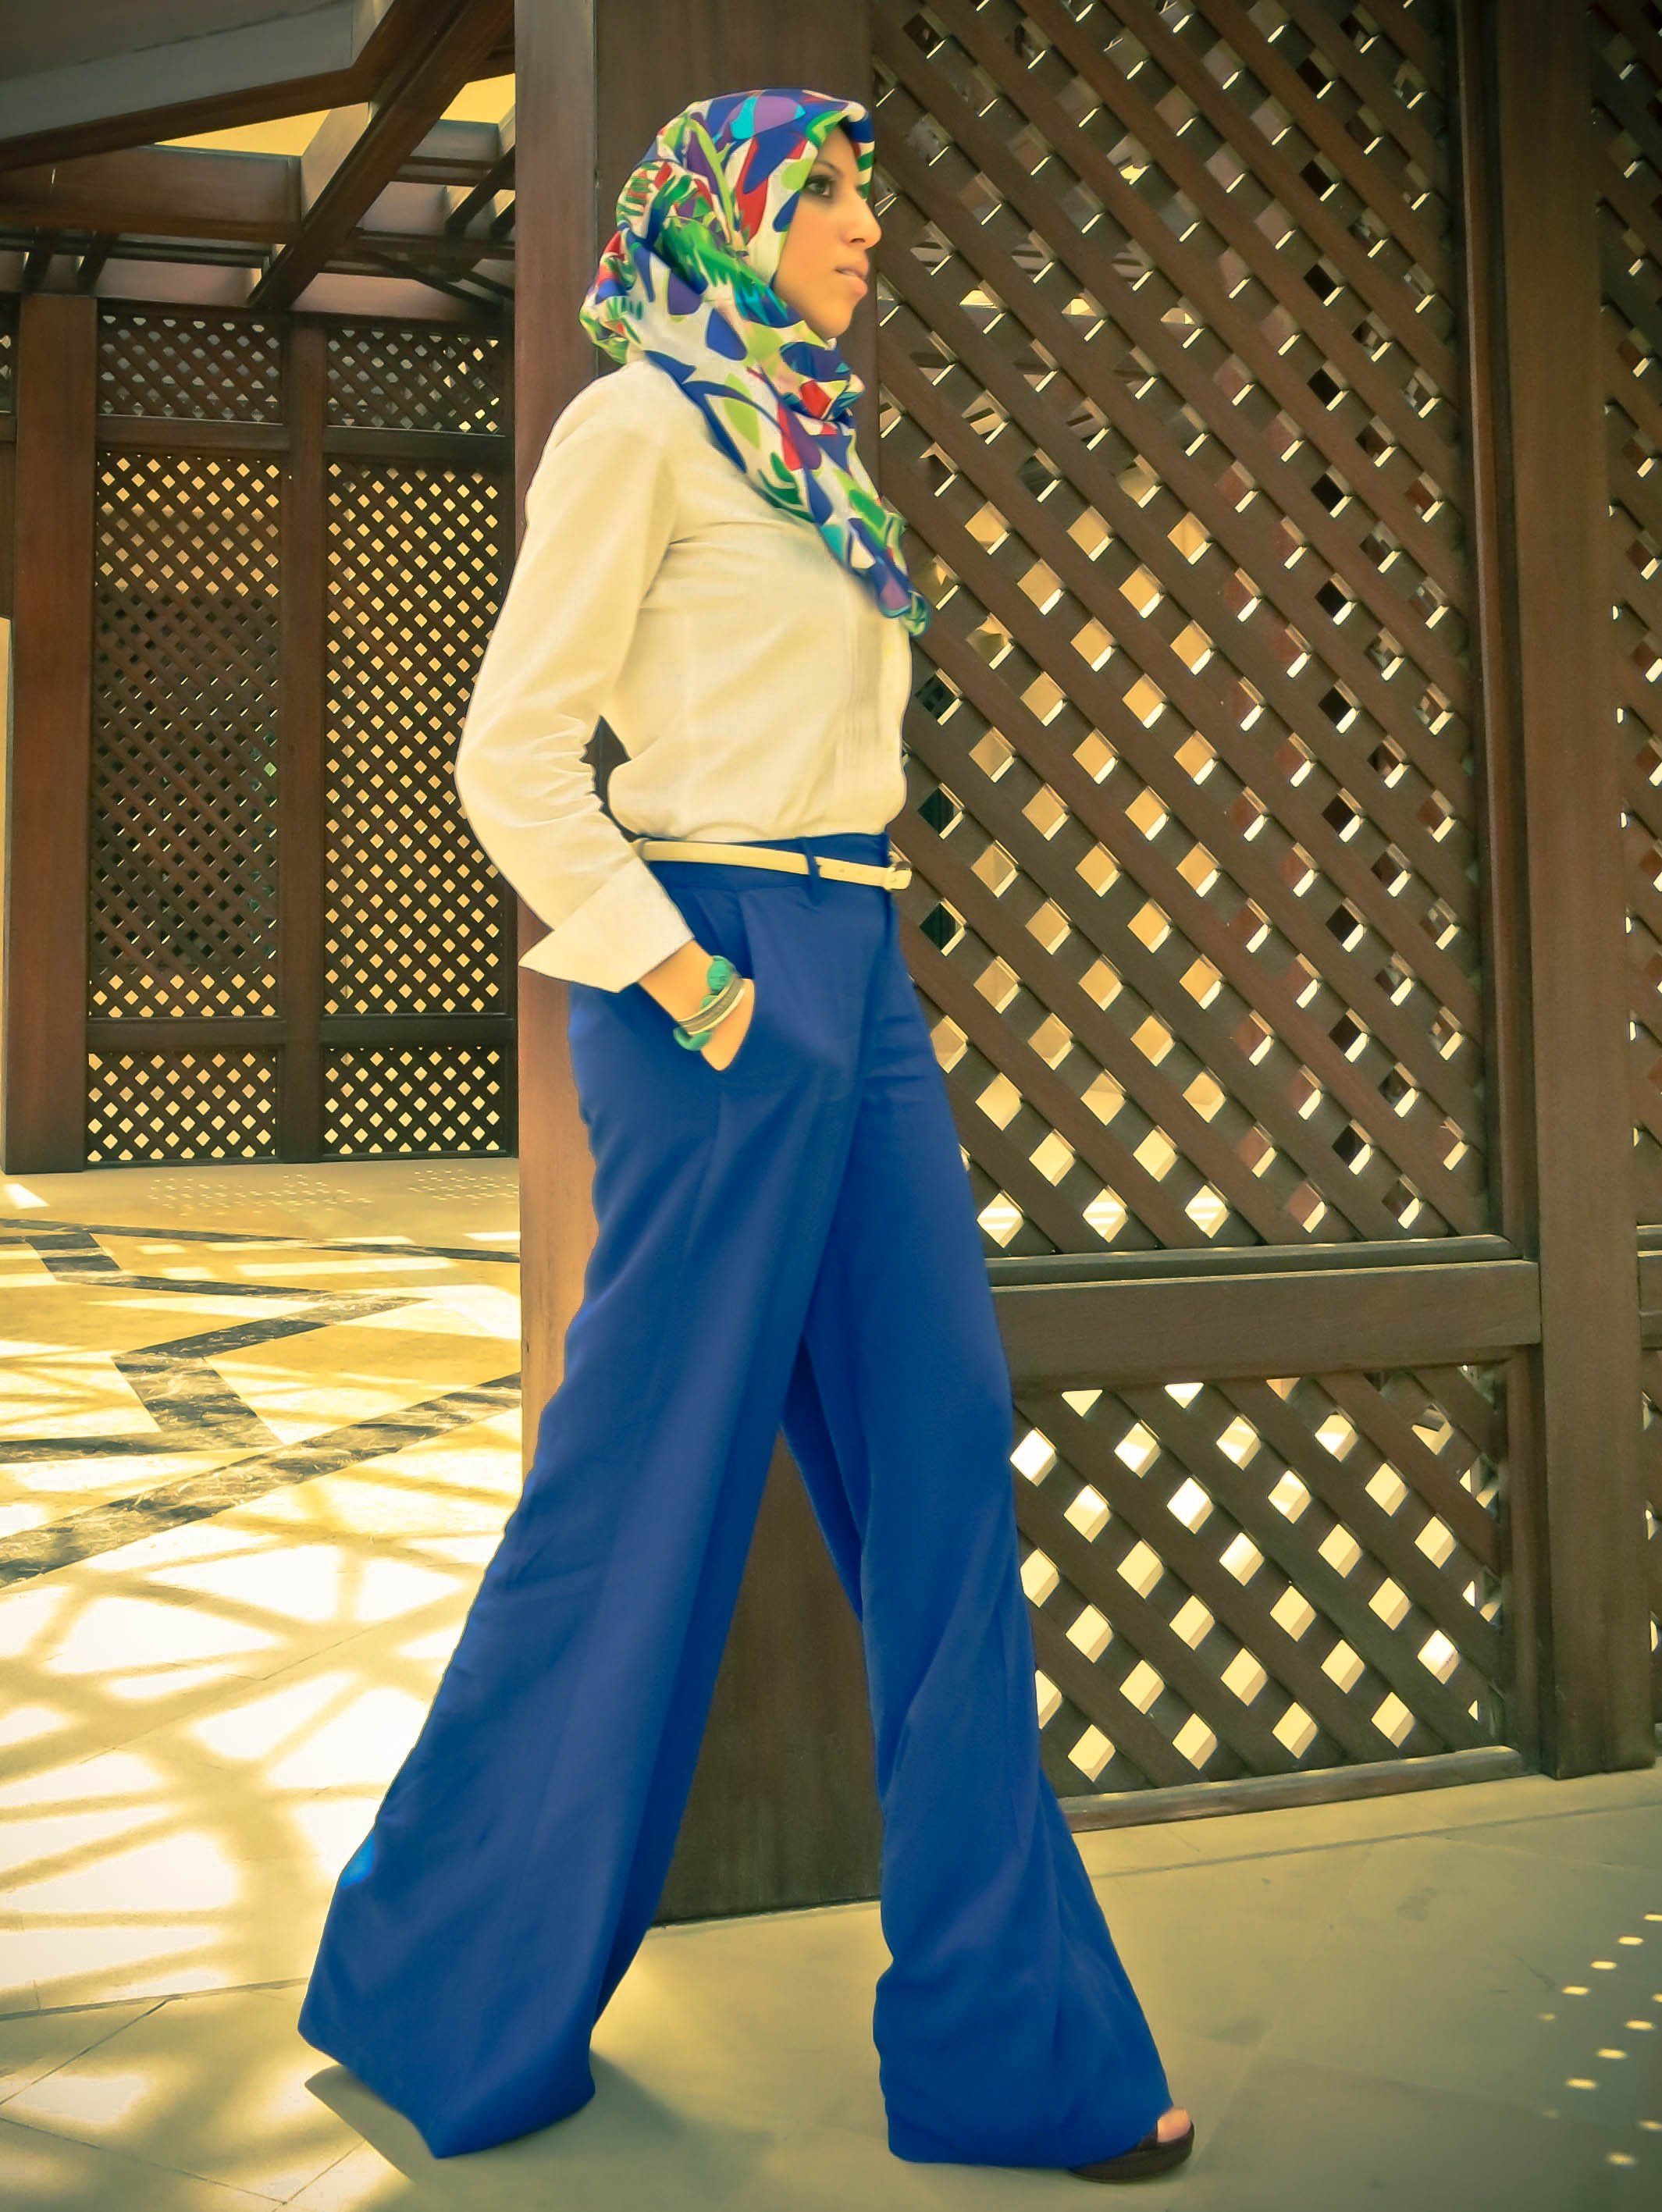 Styling Tips for Palazzo Pants! - FashionActivation